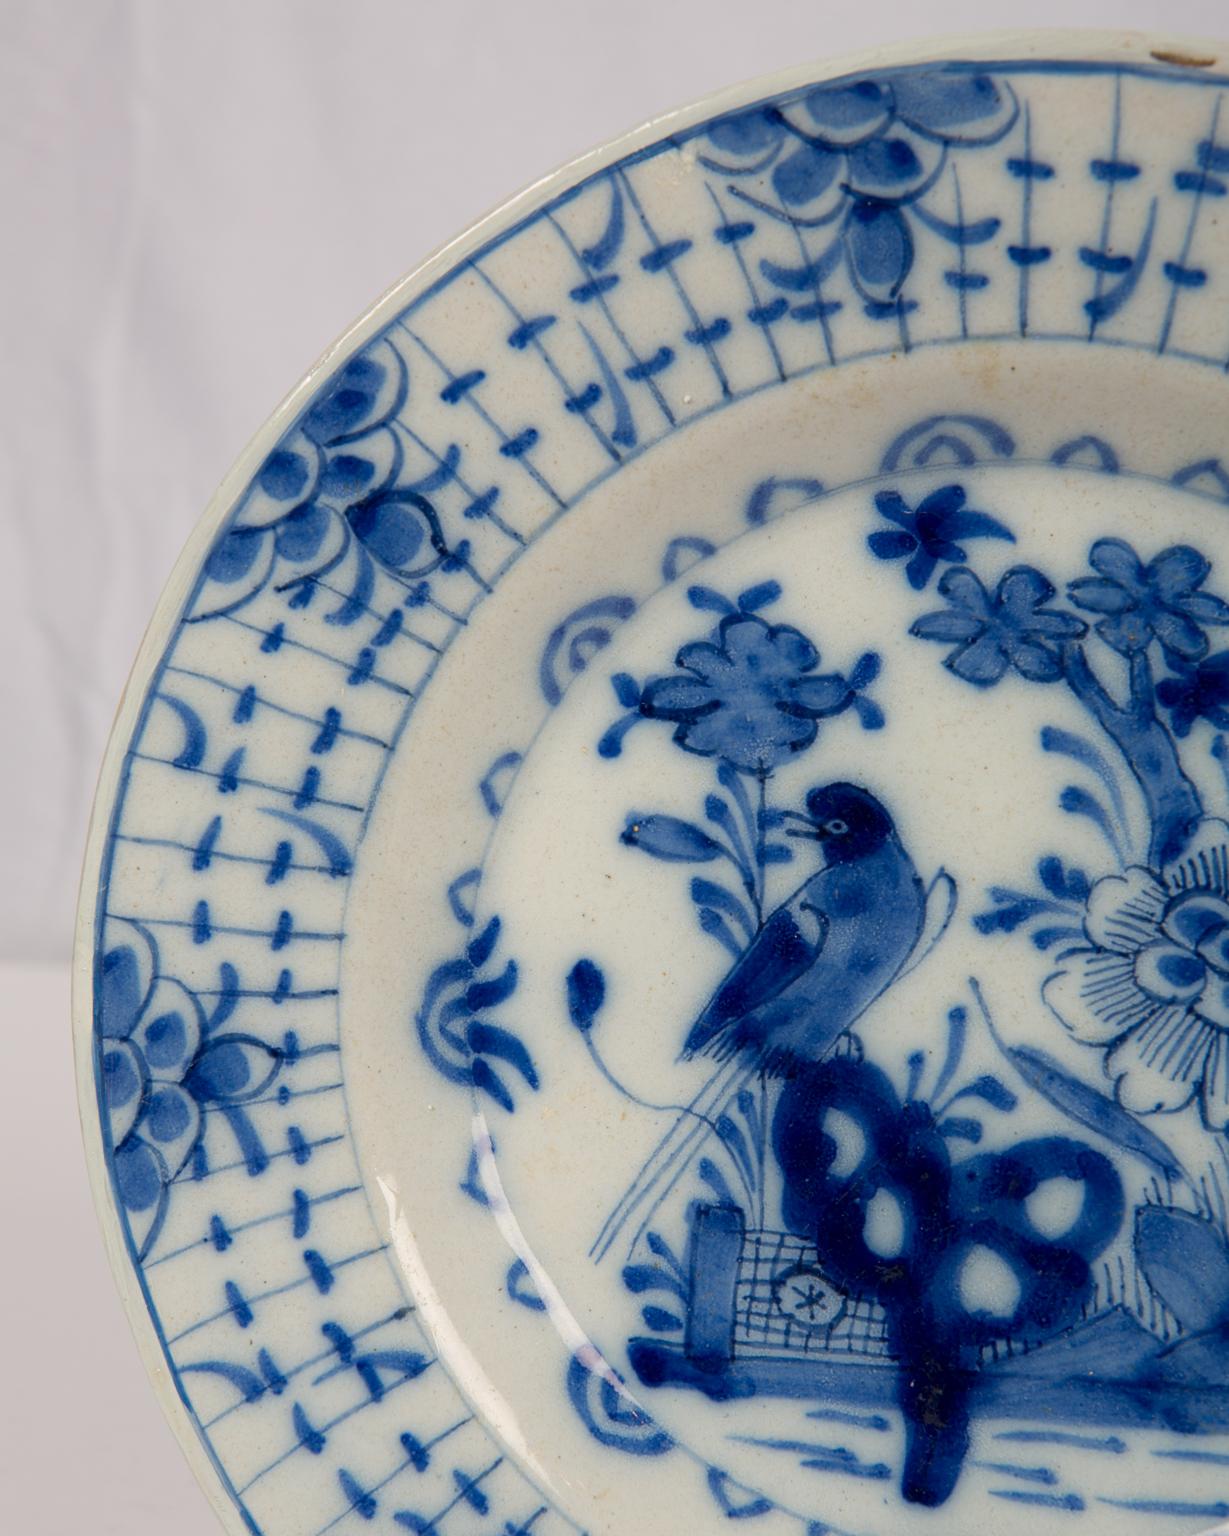 blue and white antique dishes